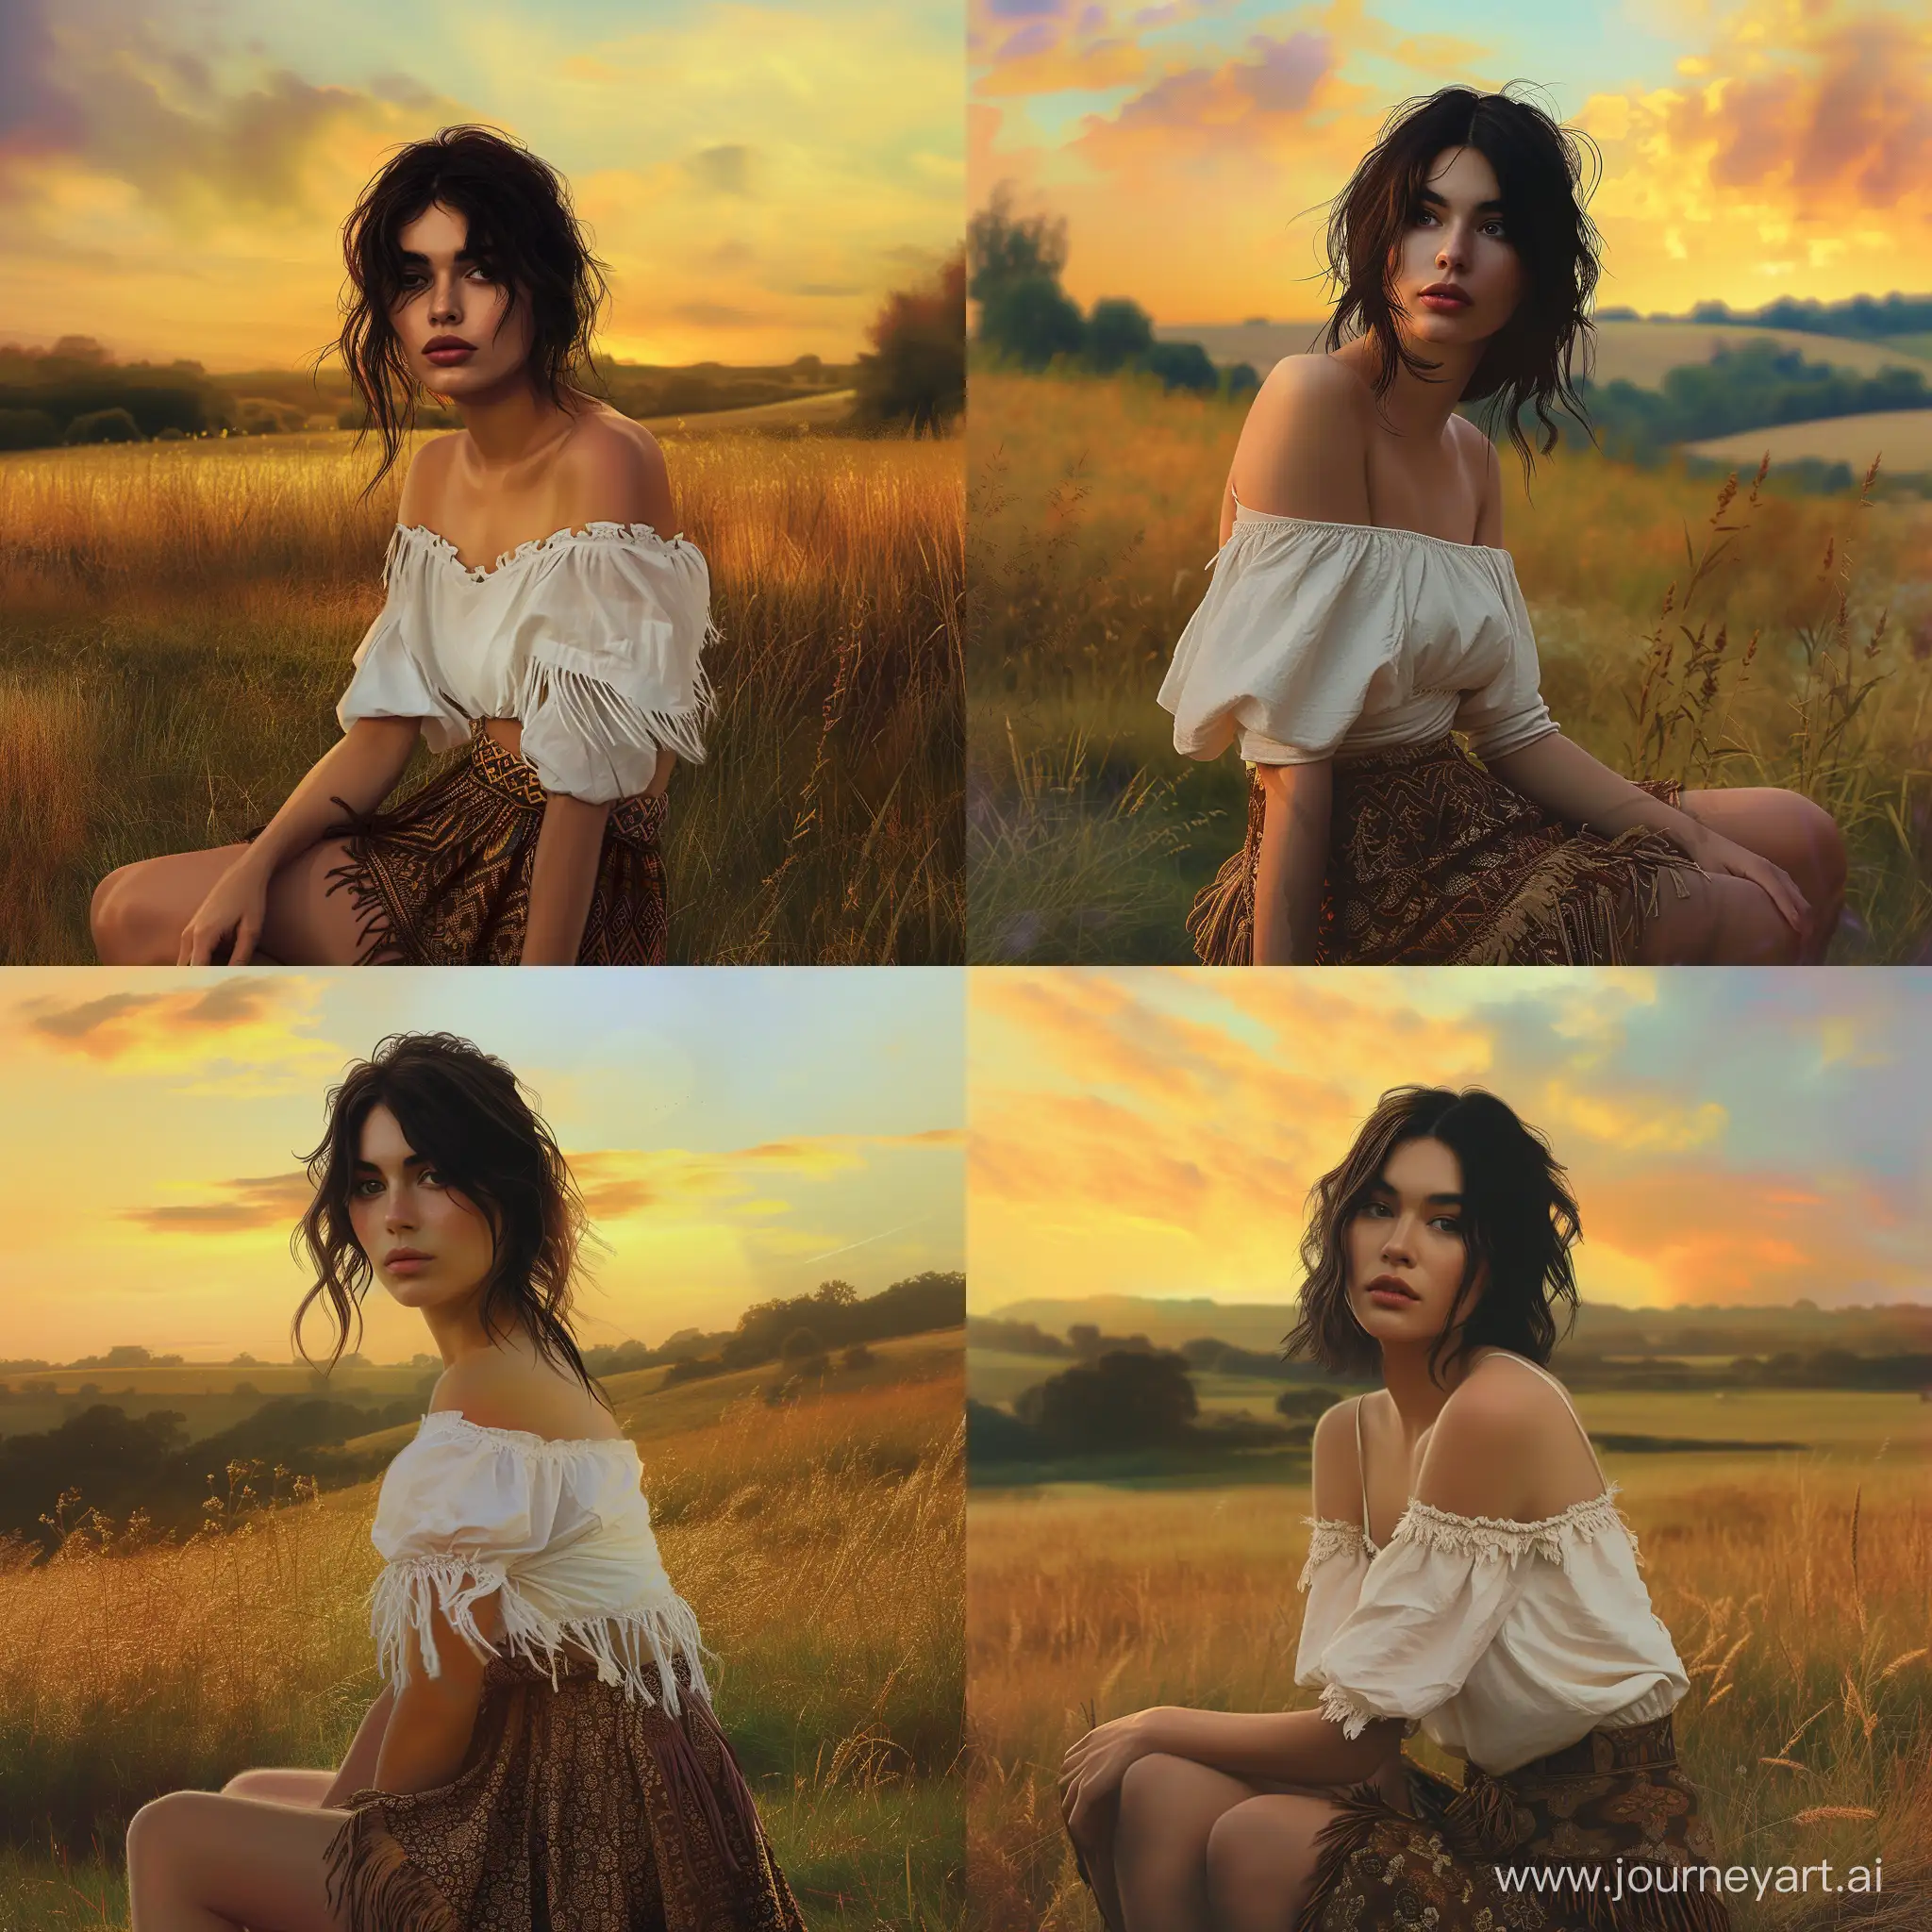 digital artwork of a young woman sitting in a field during what appears to be the golden hour, where the sun is low in the sky, casting a warm golden light across the scene. The woman is wearing a white top that appears to be fashioned in a rustic style, and a brown patterned skirt with a fringed hem. Her attire gives off a natural and earthy vibe, suggesting a setting that is either historical or fantasy-themed.

The woman has dark hair, which is somewhat tousled, and her expression seems contemplative as she looks off into the distance. Her dark eyes and the way she is slightly biting her lip add to the pensive mood of the image. She is also in a relaxed pose, with one knee up and her arms resting on her knee, which indicates a moment of rest or reflection.

The field is filled with tall grasses and the landscape behind her includes gently rolling hills with trees and possibly a small forest in the distance. The sky is painted with hues of yellow, orange, and a touch of pink, indicating a sunset. The overall atmosphere of the artwork is serene and peaceful, with a focus on the beauty of nature and the quiet moment the subject is experiencing.